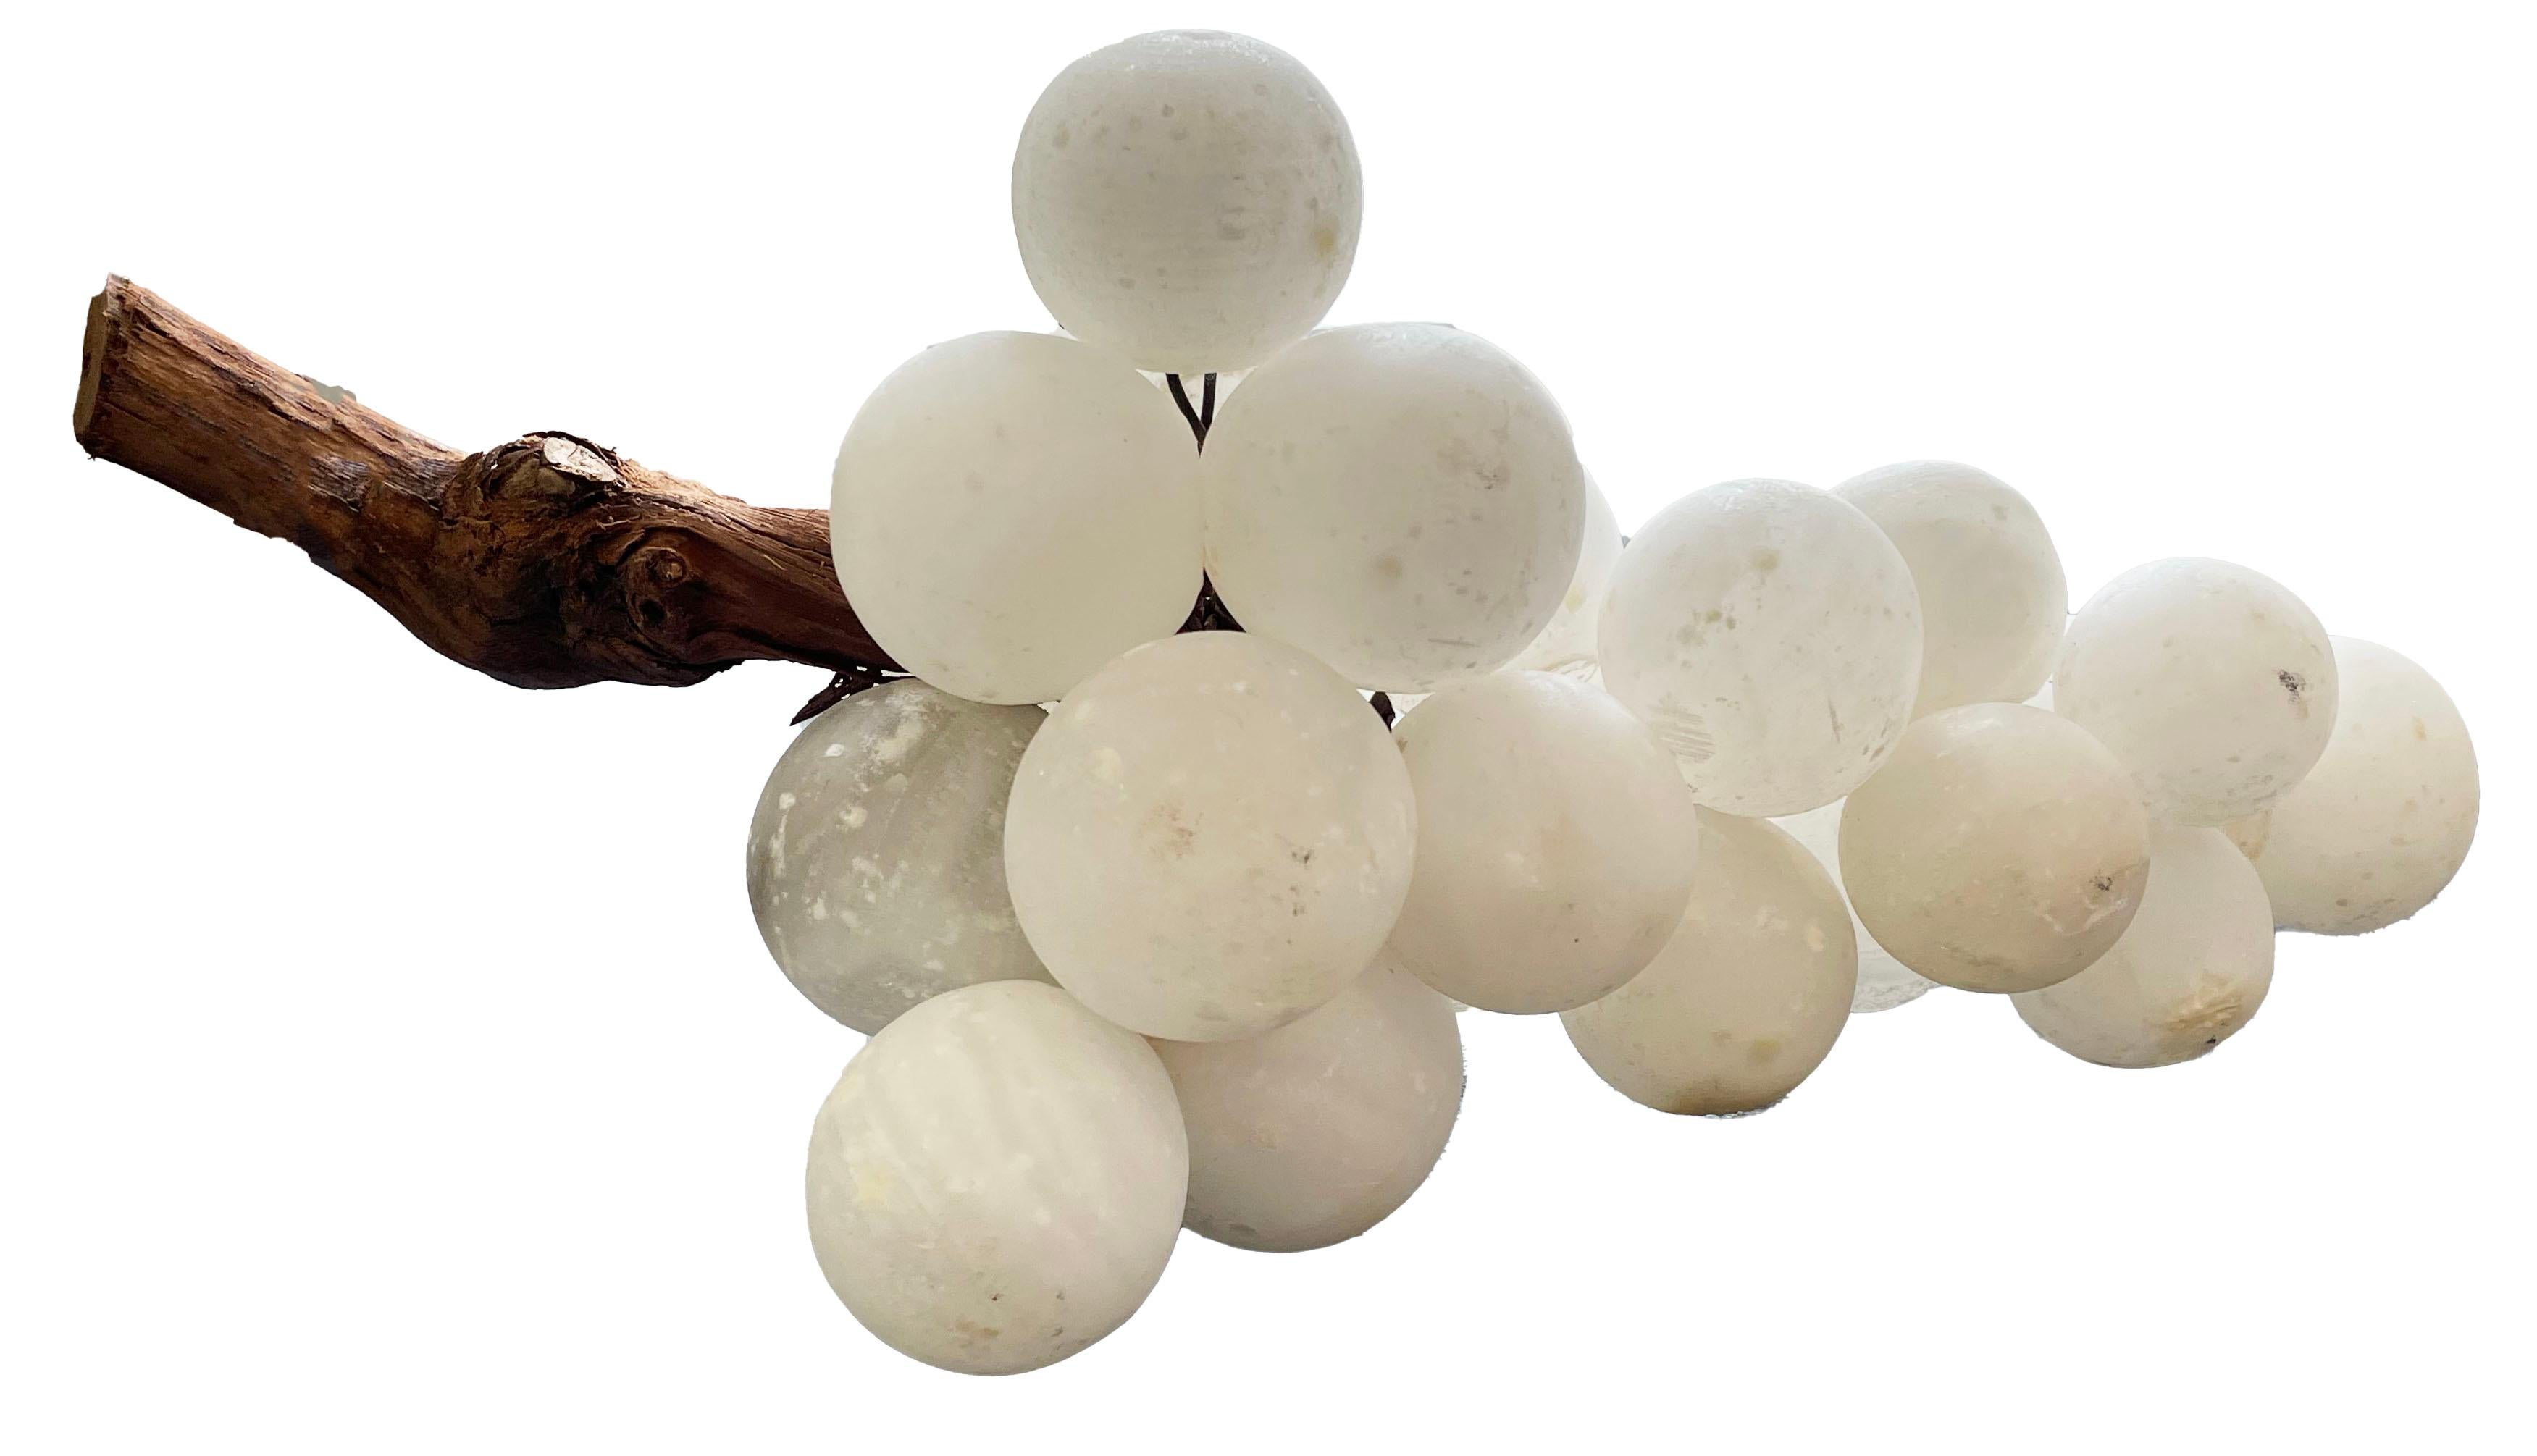 Beautiful vintage Mid-Century Modern Italian grape cluster made of alabaster. Natural stem. The varnish has been stripped off, removing the yellow color and allowing the original white alabaster to shine. a beautiful addition to any decor.